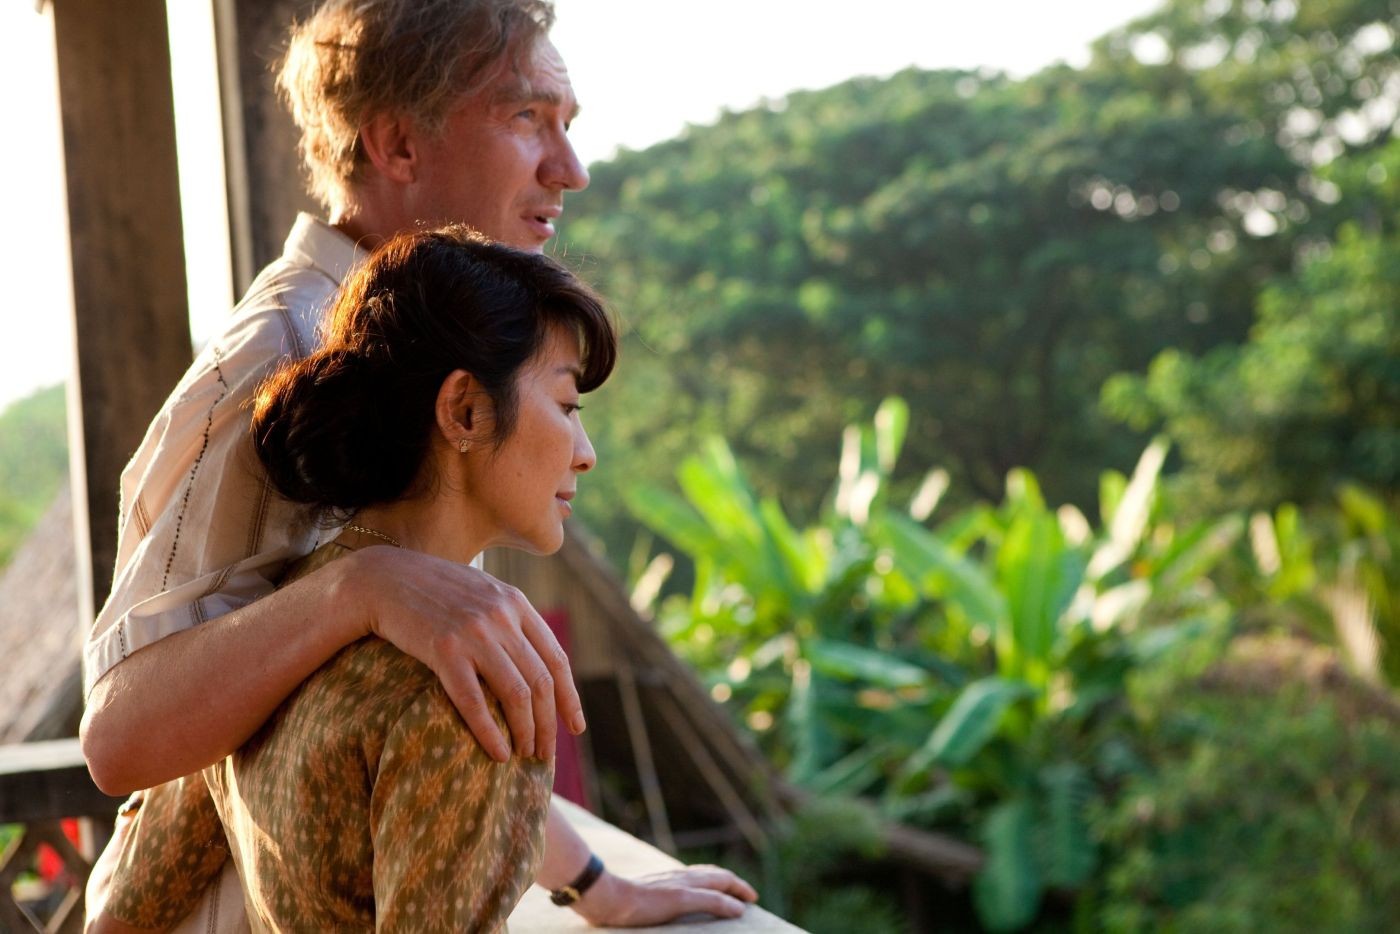 David Thewlis stars as Michael Aris and Michelle Yeoh stars as Aung San Suu Kyi in Cohen Media Group's The Lady (2012)